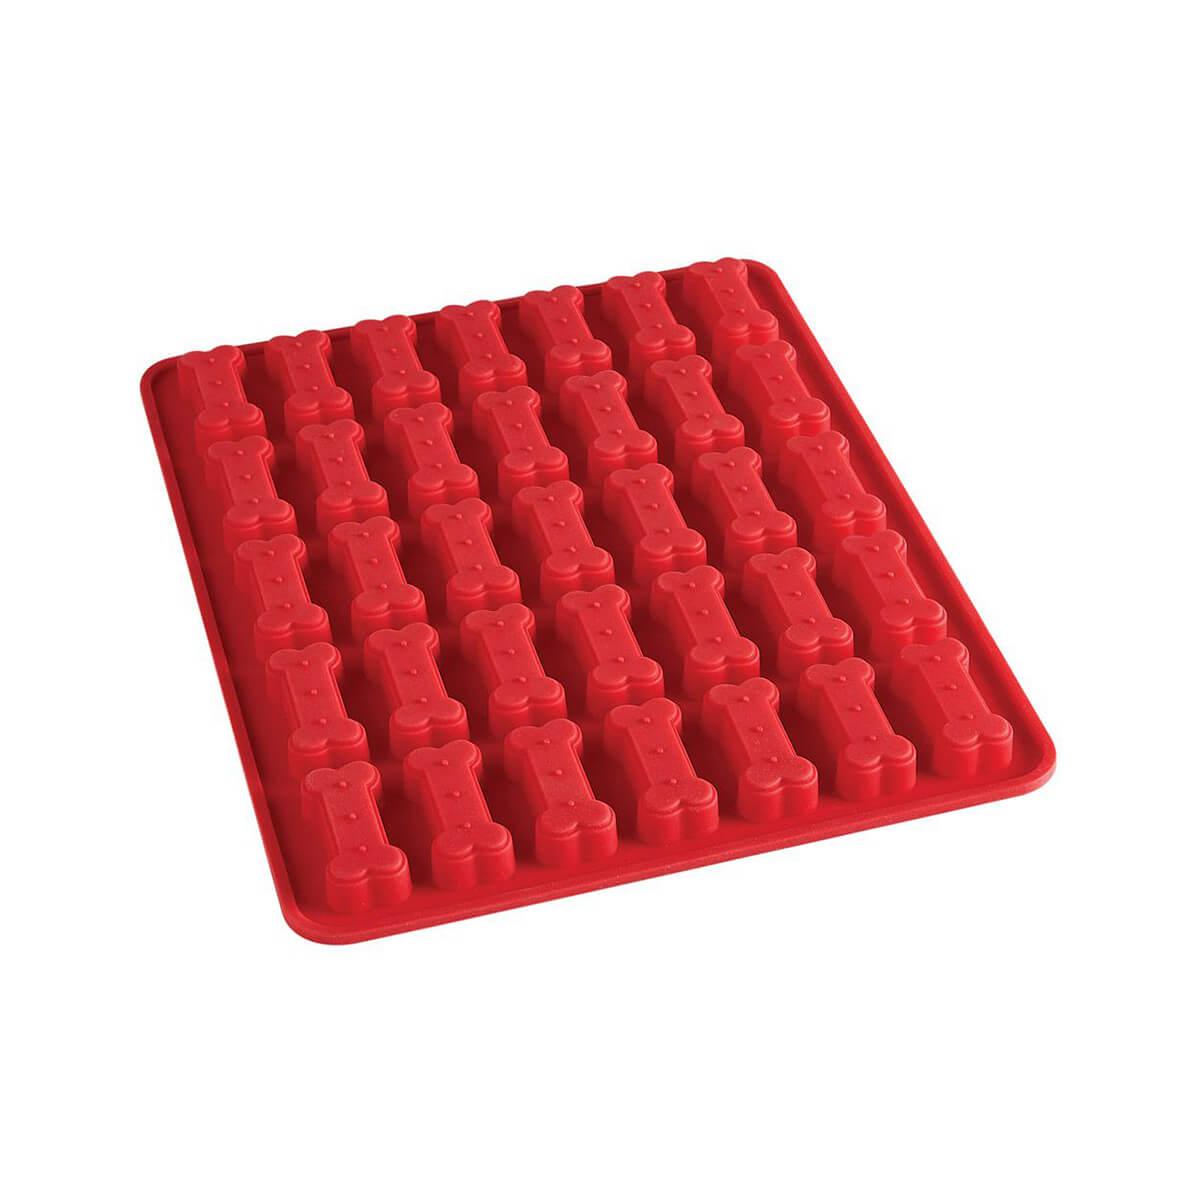 New Creative Silicone American Map Ice Cube Tray Mold Cookies